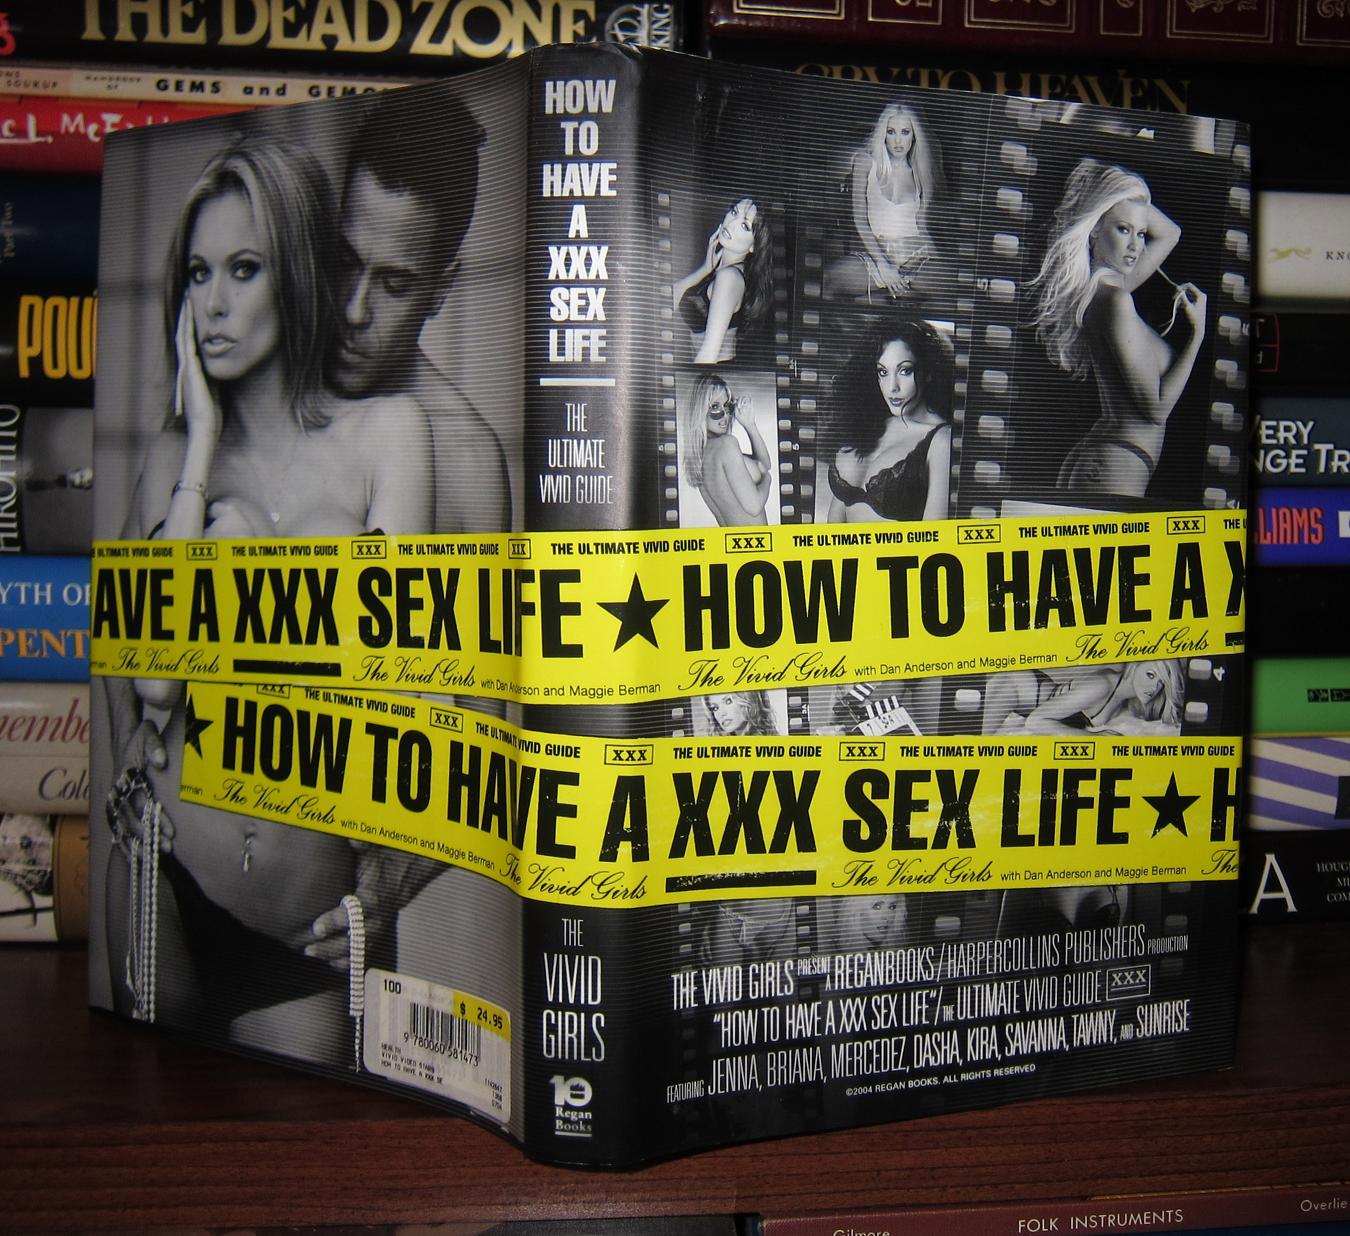 HOW TO HAVE A XXX SEX LIFE The Ultimate Vivid Guide Vivid Girls First Edition; First Printing picture pic